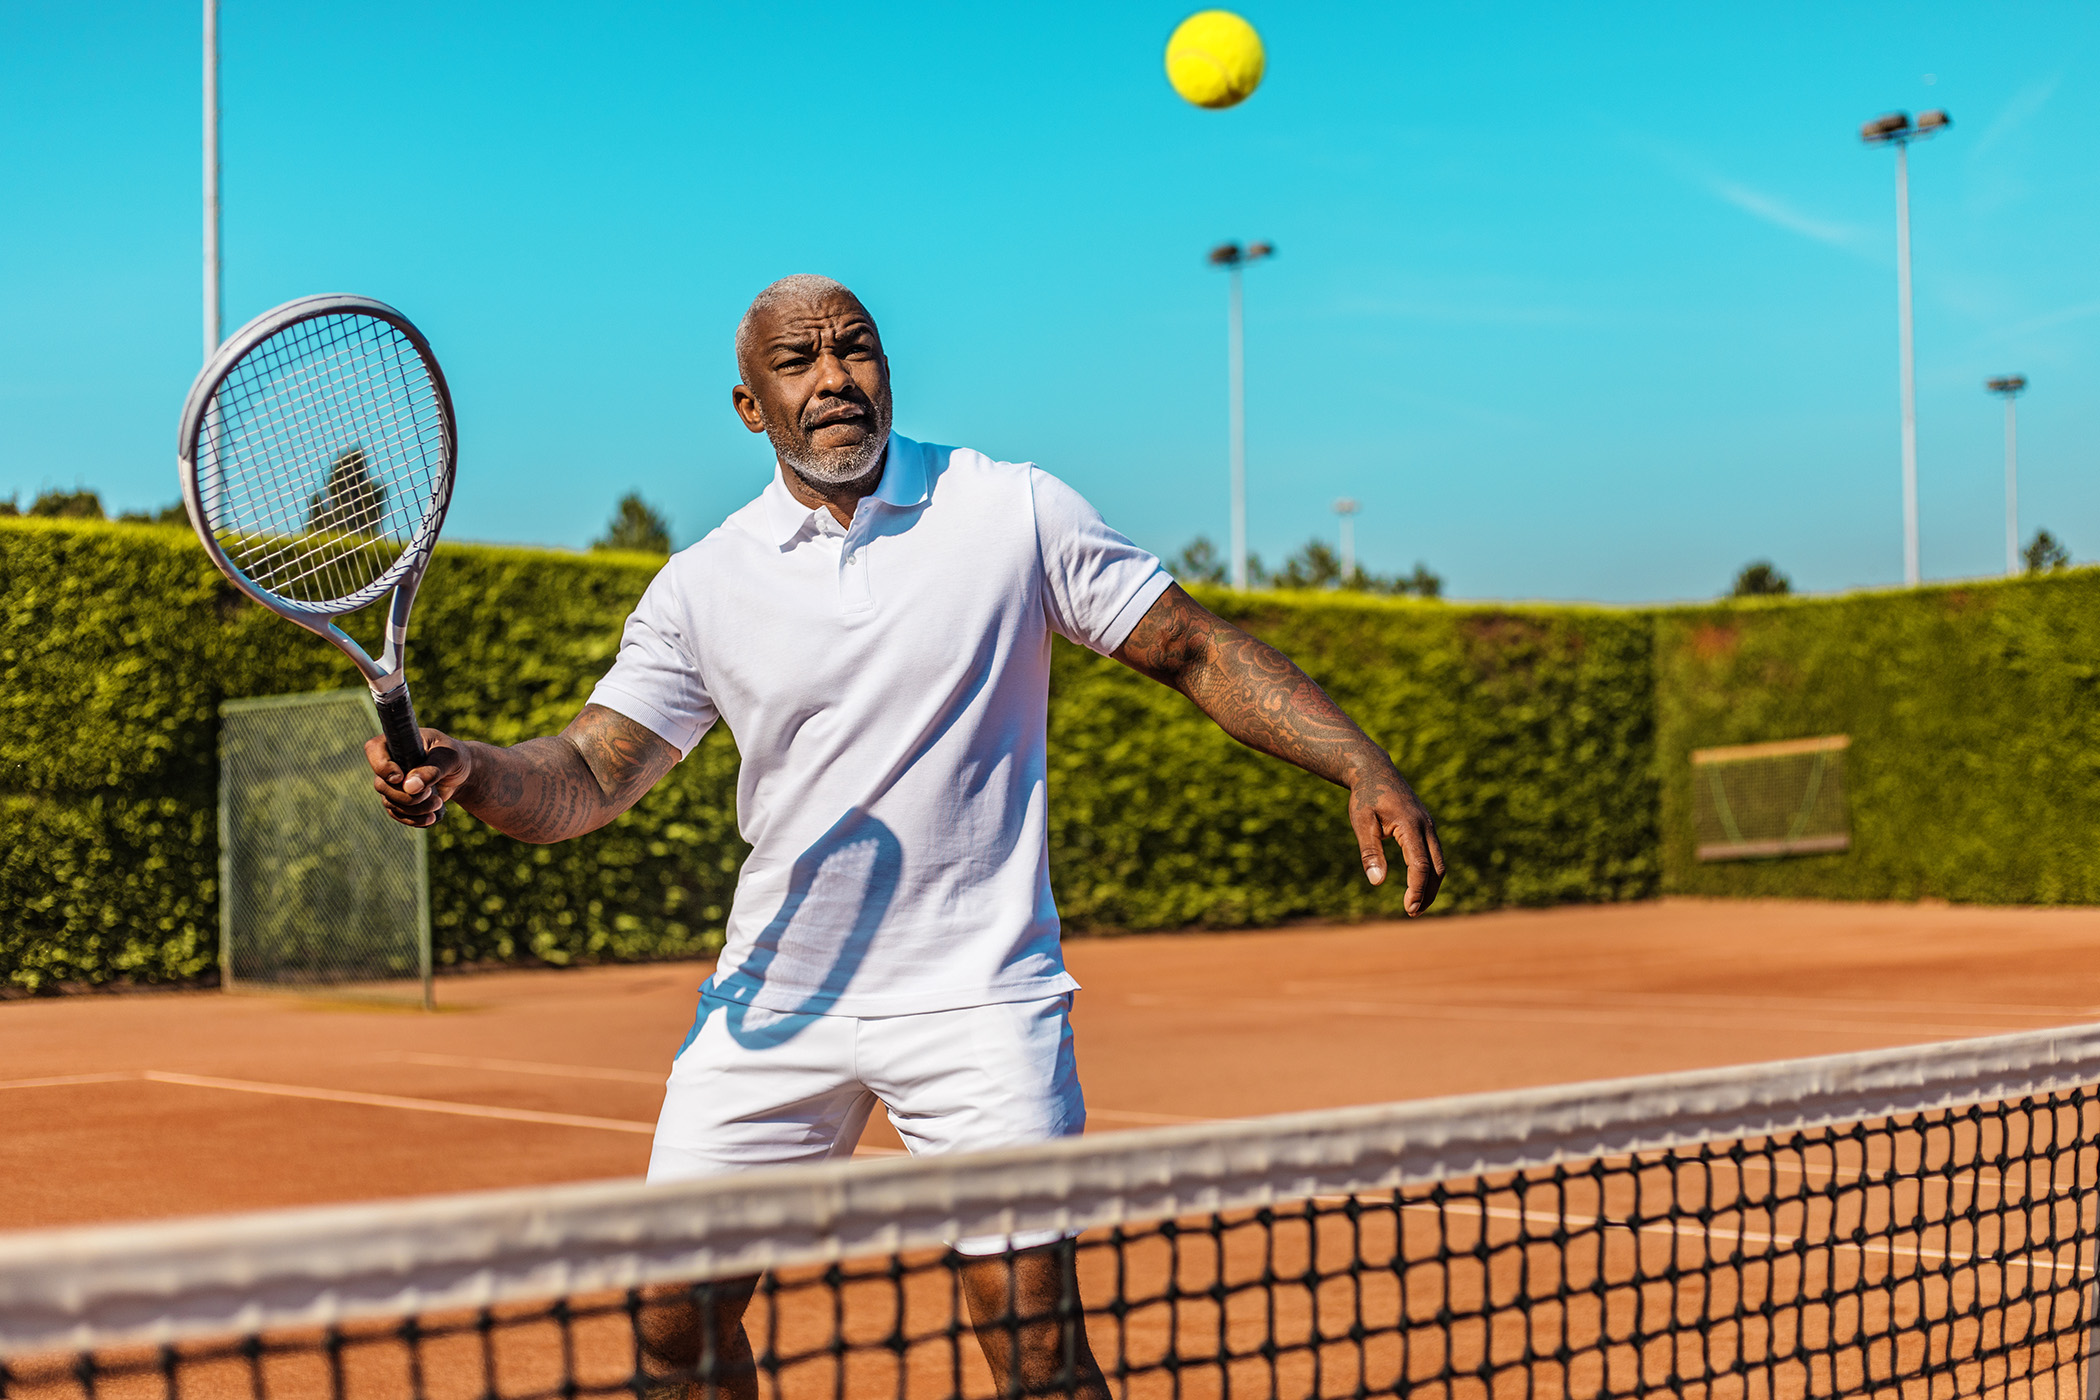 older man playing tennis on a sunny day